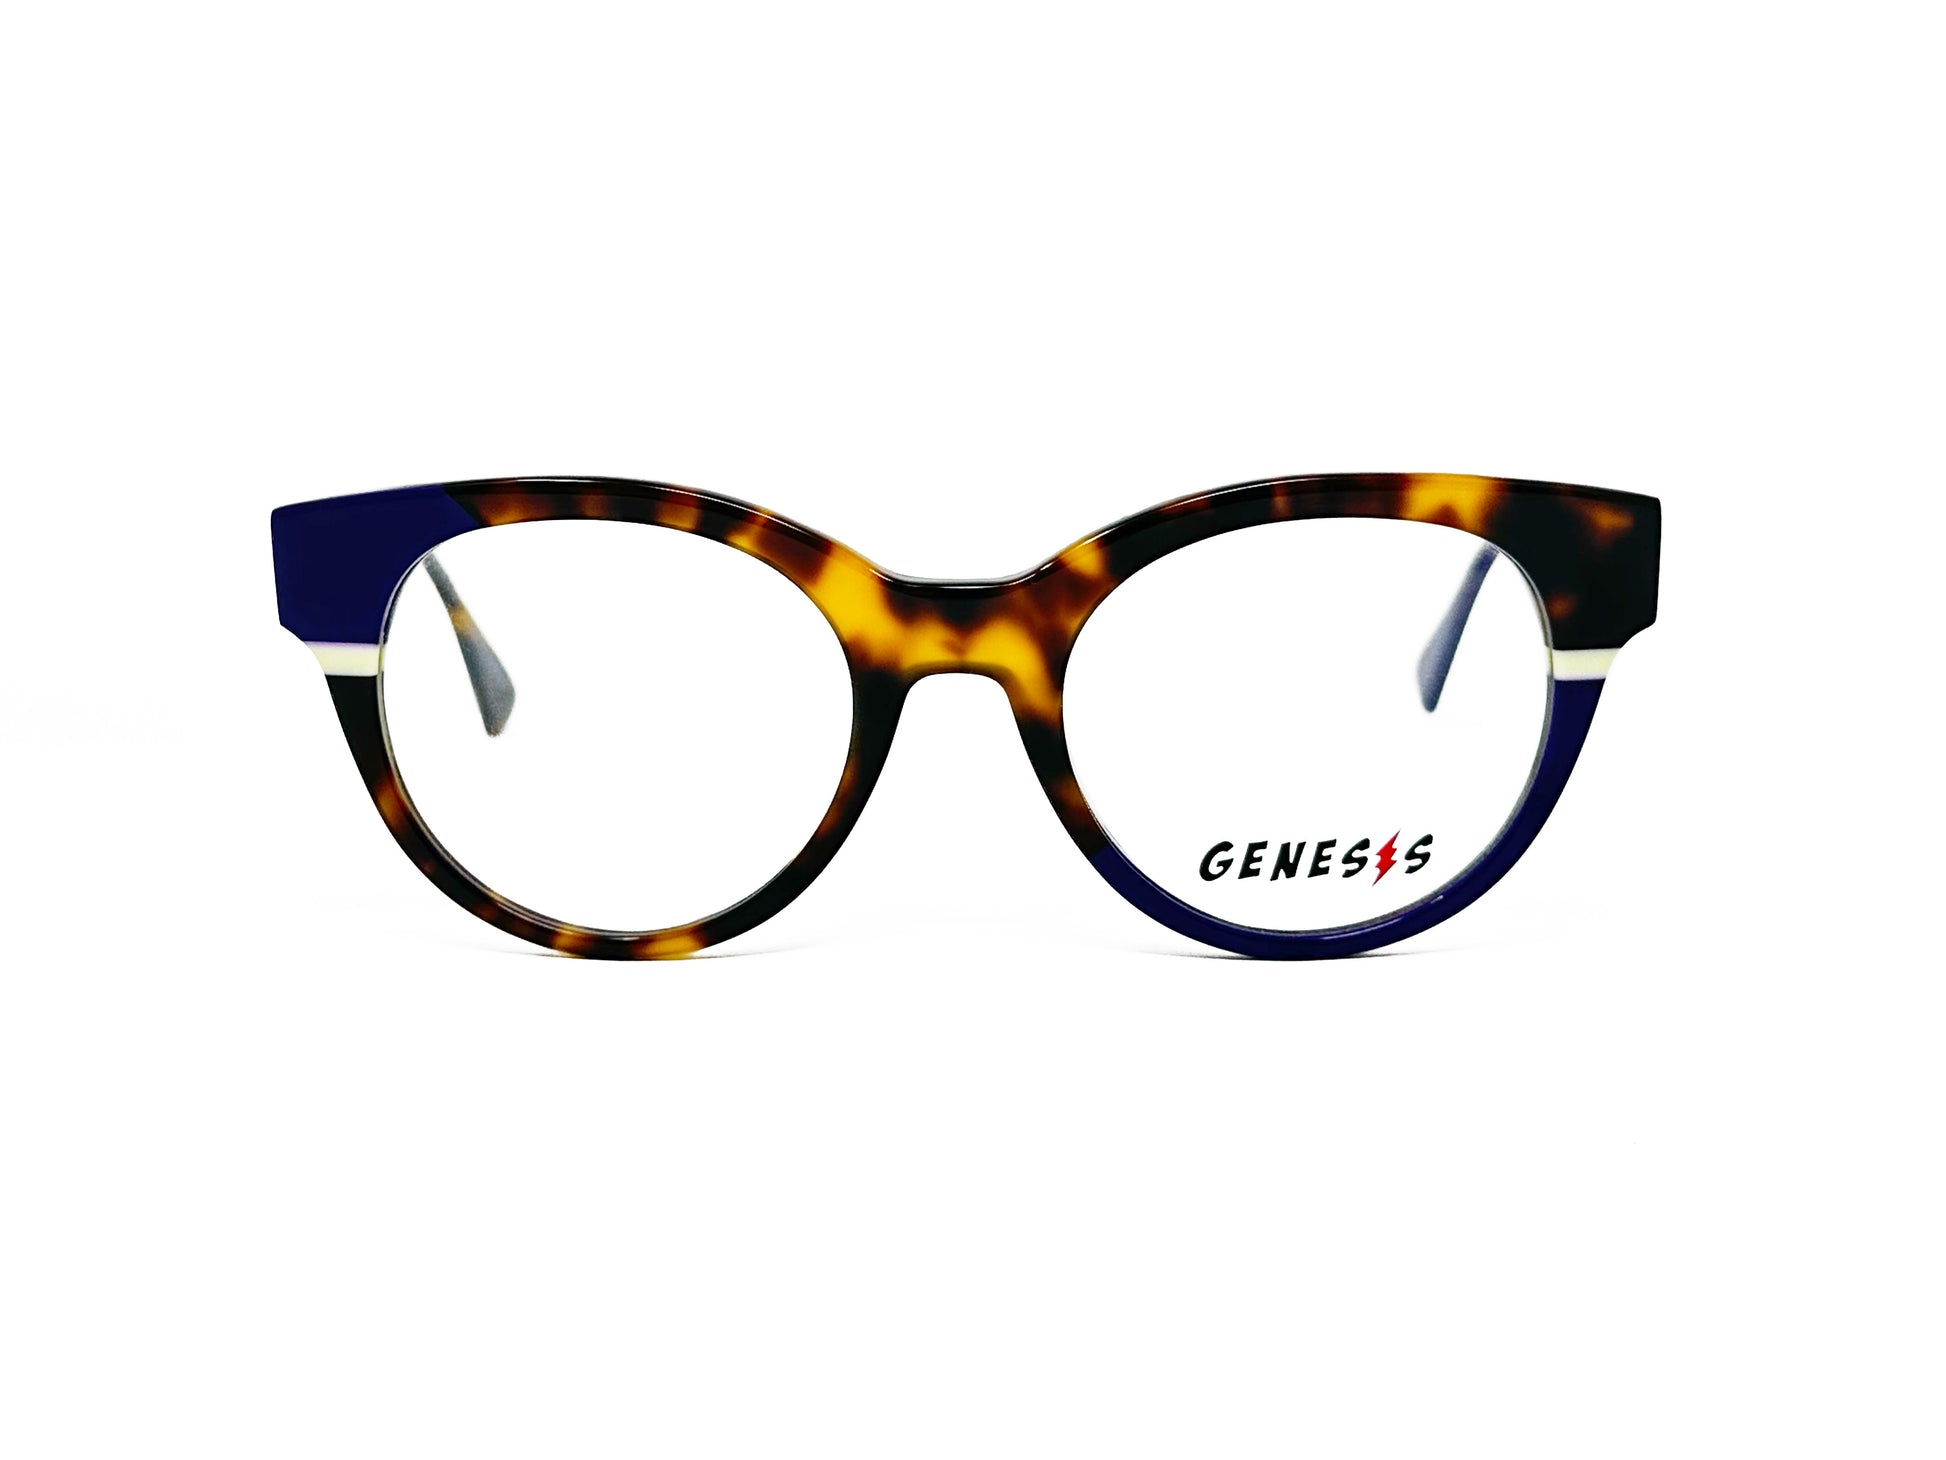 Genesis round, acetate optical frame. Model: GV1523. Color: 3 - Tortoise with blue corner and white stripe. Front view. 